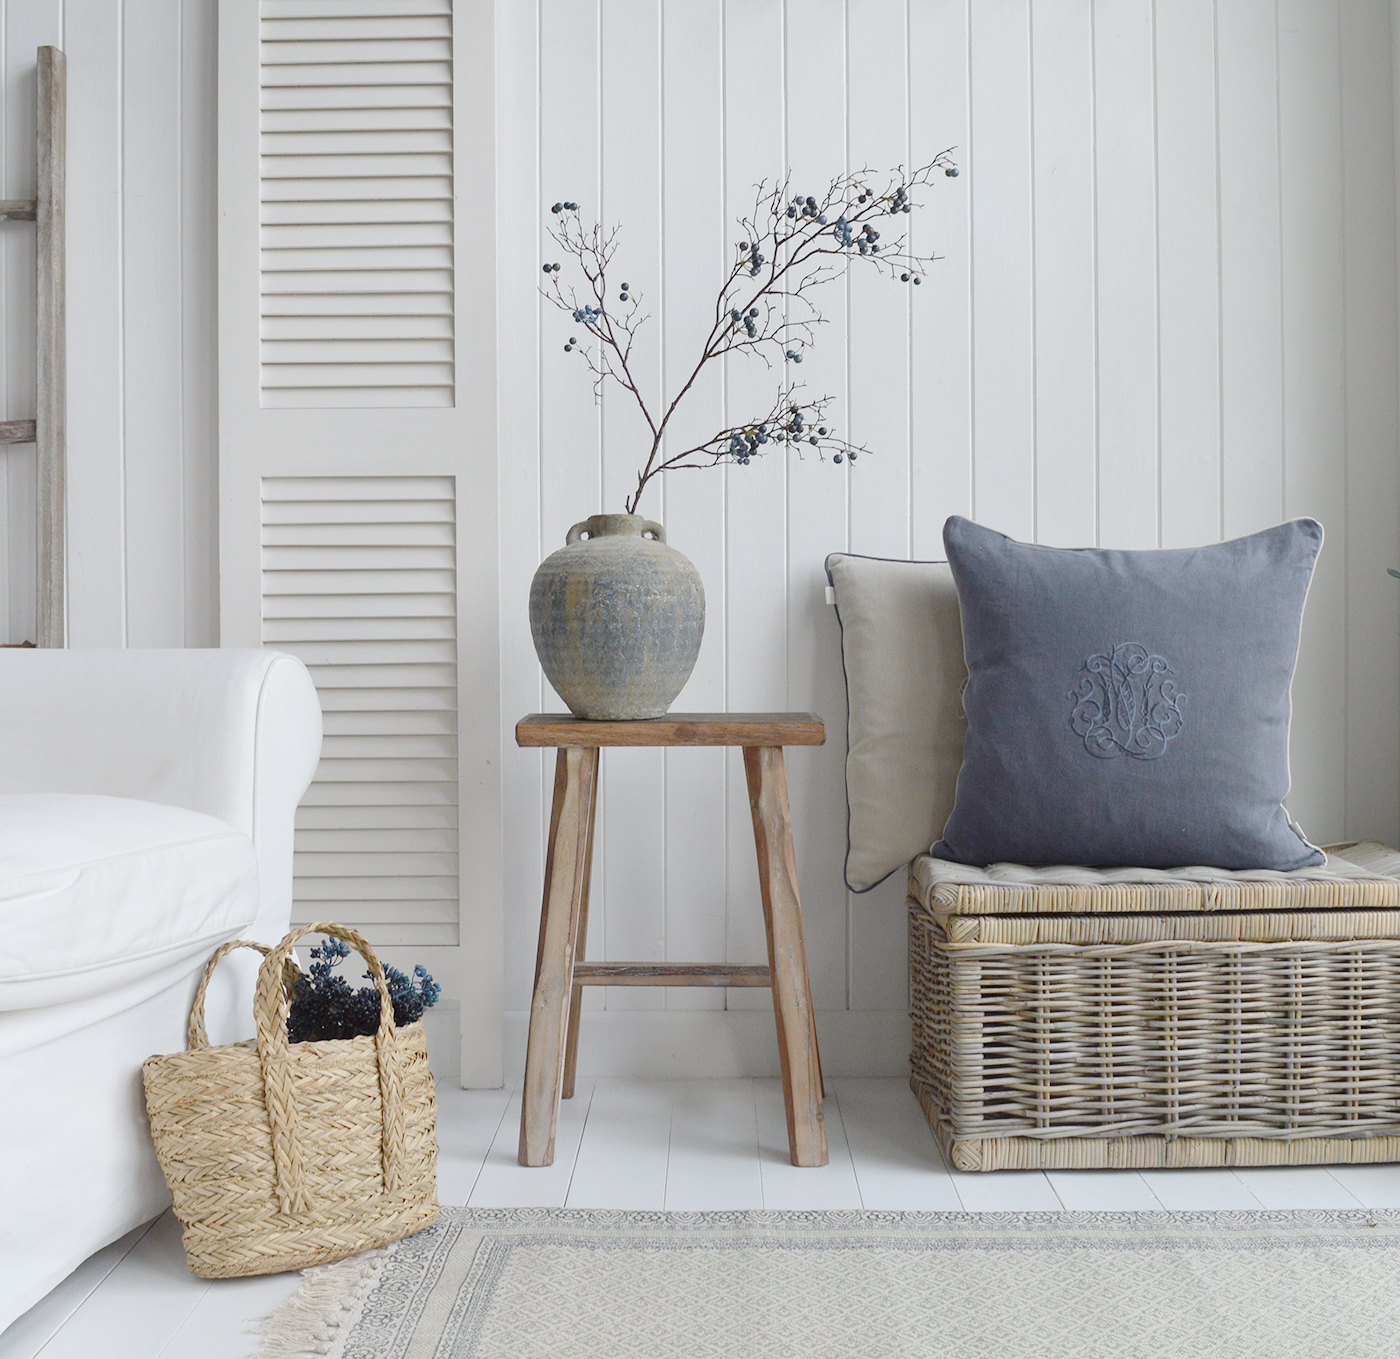 New England interiors for Coastal, modern farmhouse and country styled homes. Shown is the Georgetown stool with the Seaside baskets, Pembroke Vase, Blueberry Branch, monogram cushions and Freeport handled basket in a white living room